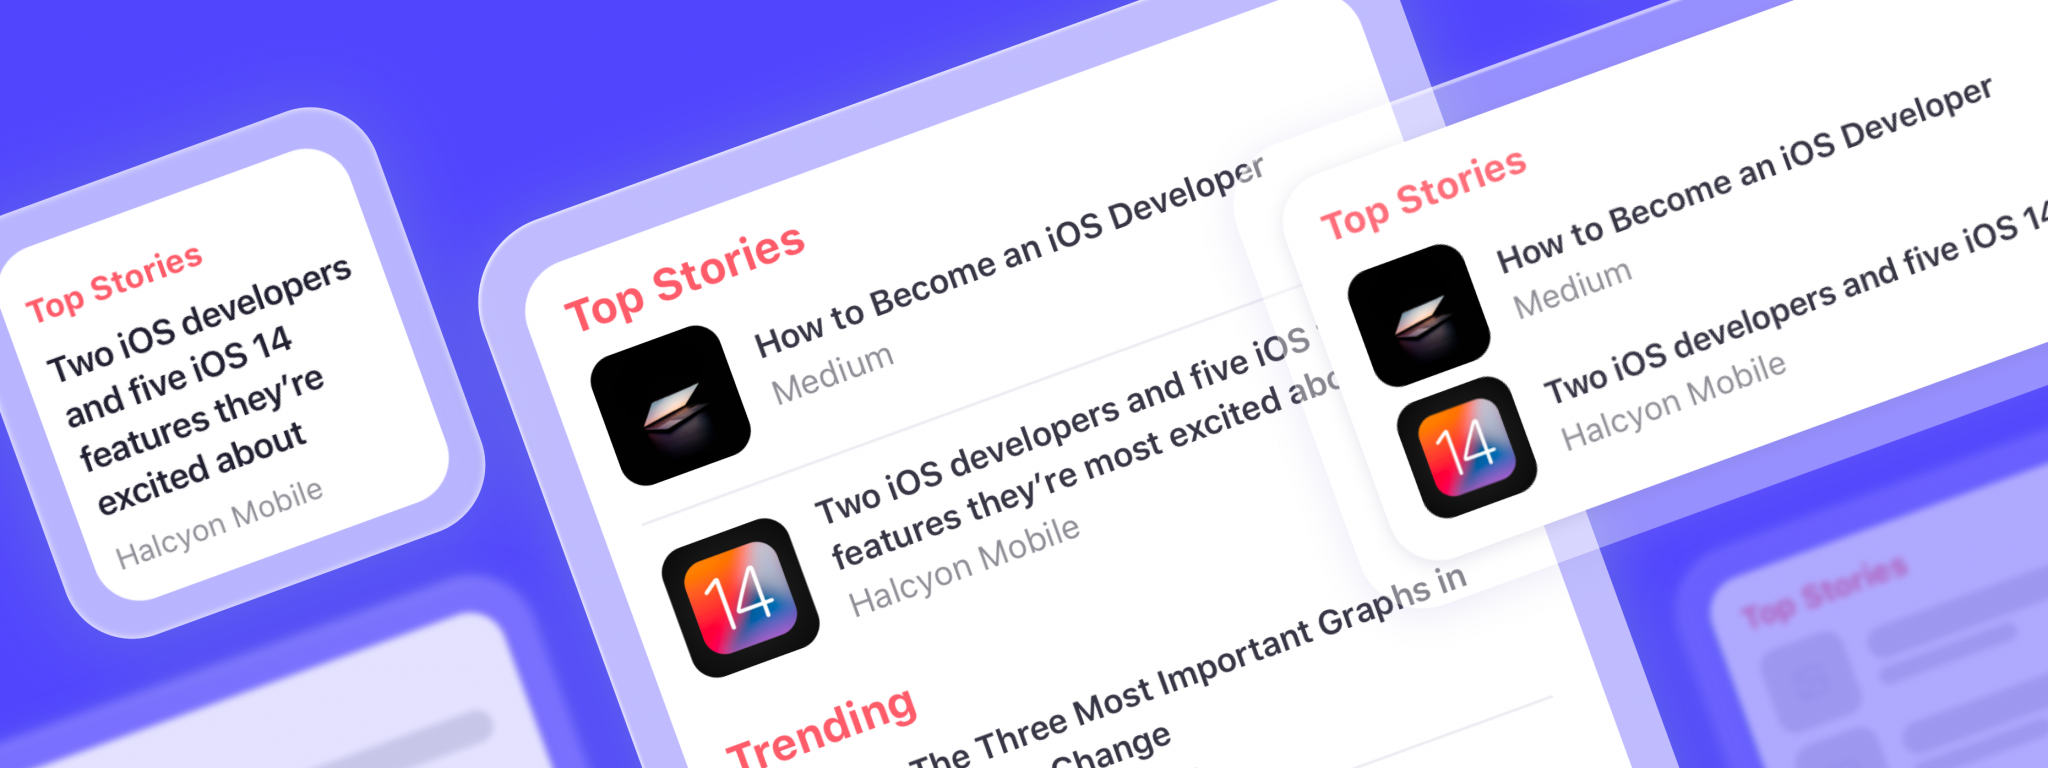 Article widget in iOS14 showing the latest news